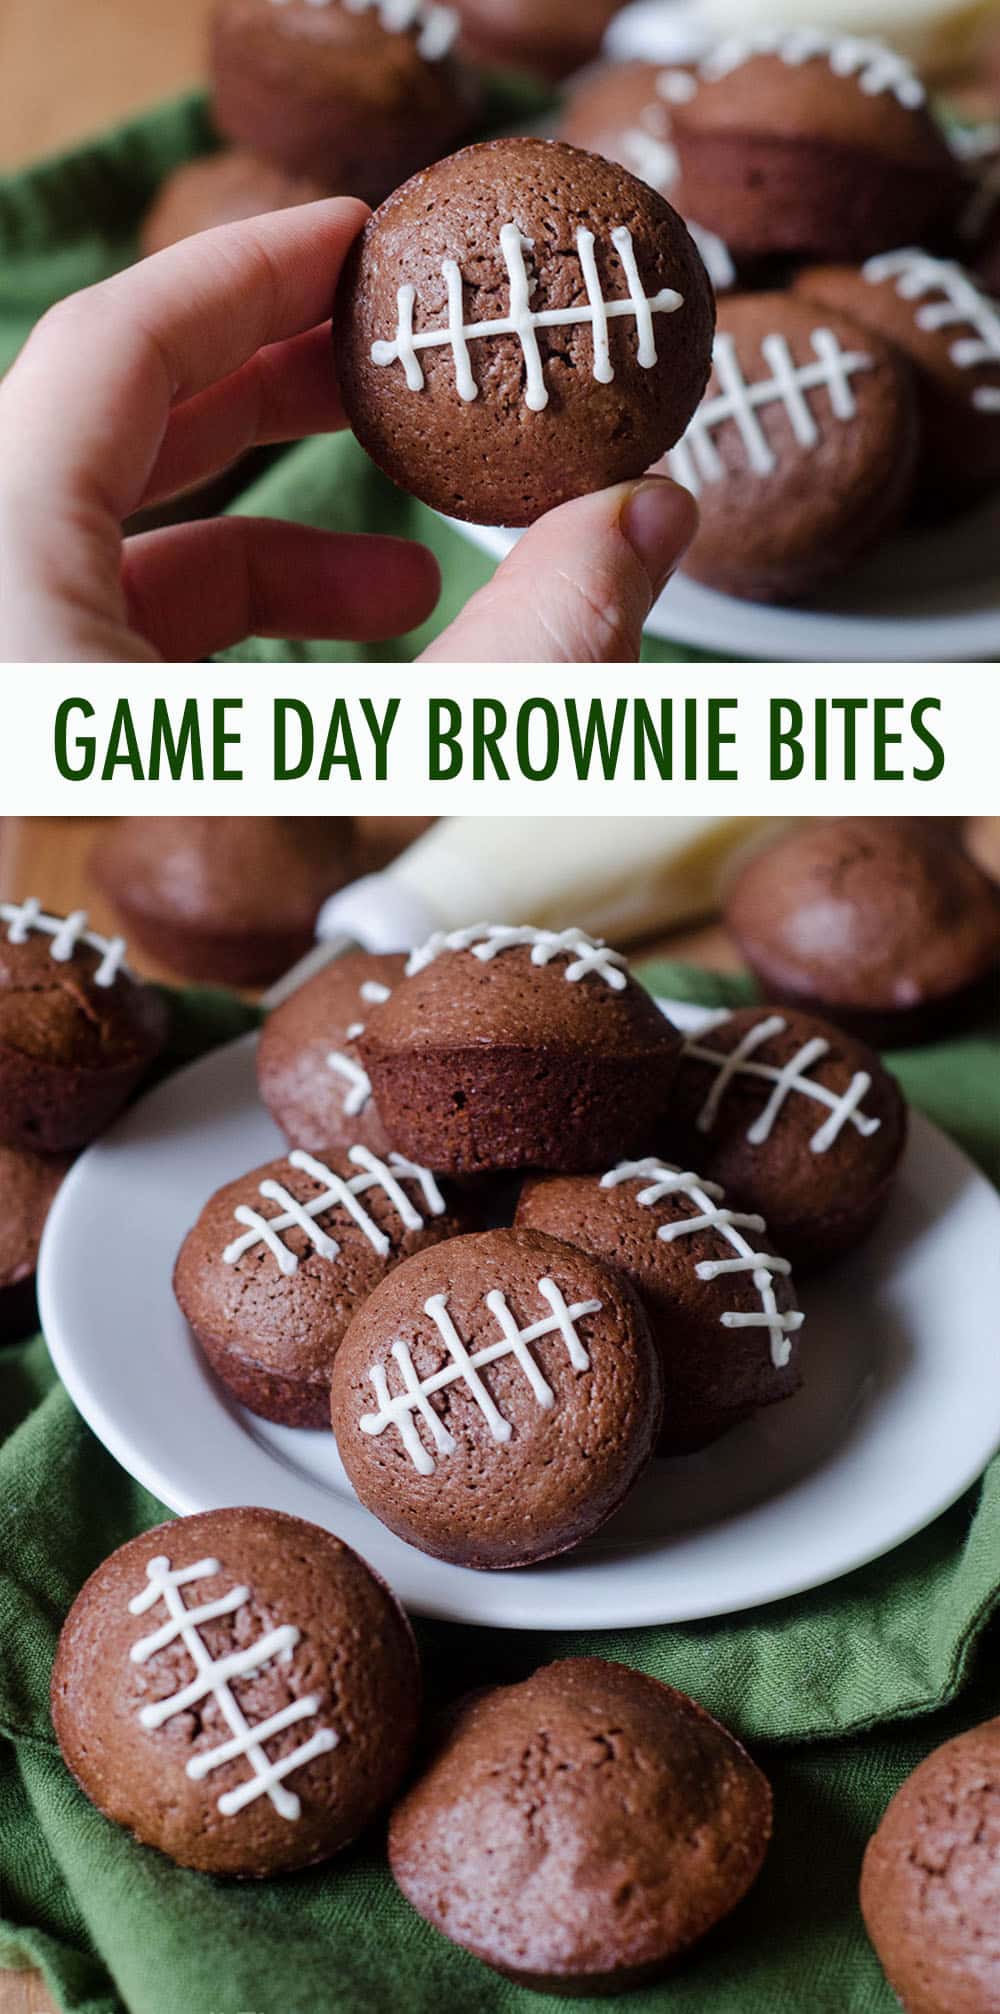 Adorable bite-size brownies adorned with buttercream football stripes. Perfect for any football game day you're looking to celebrate! via @frshaprilflours